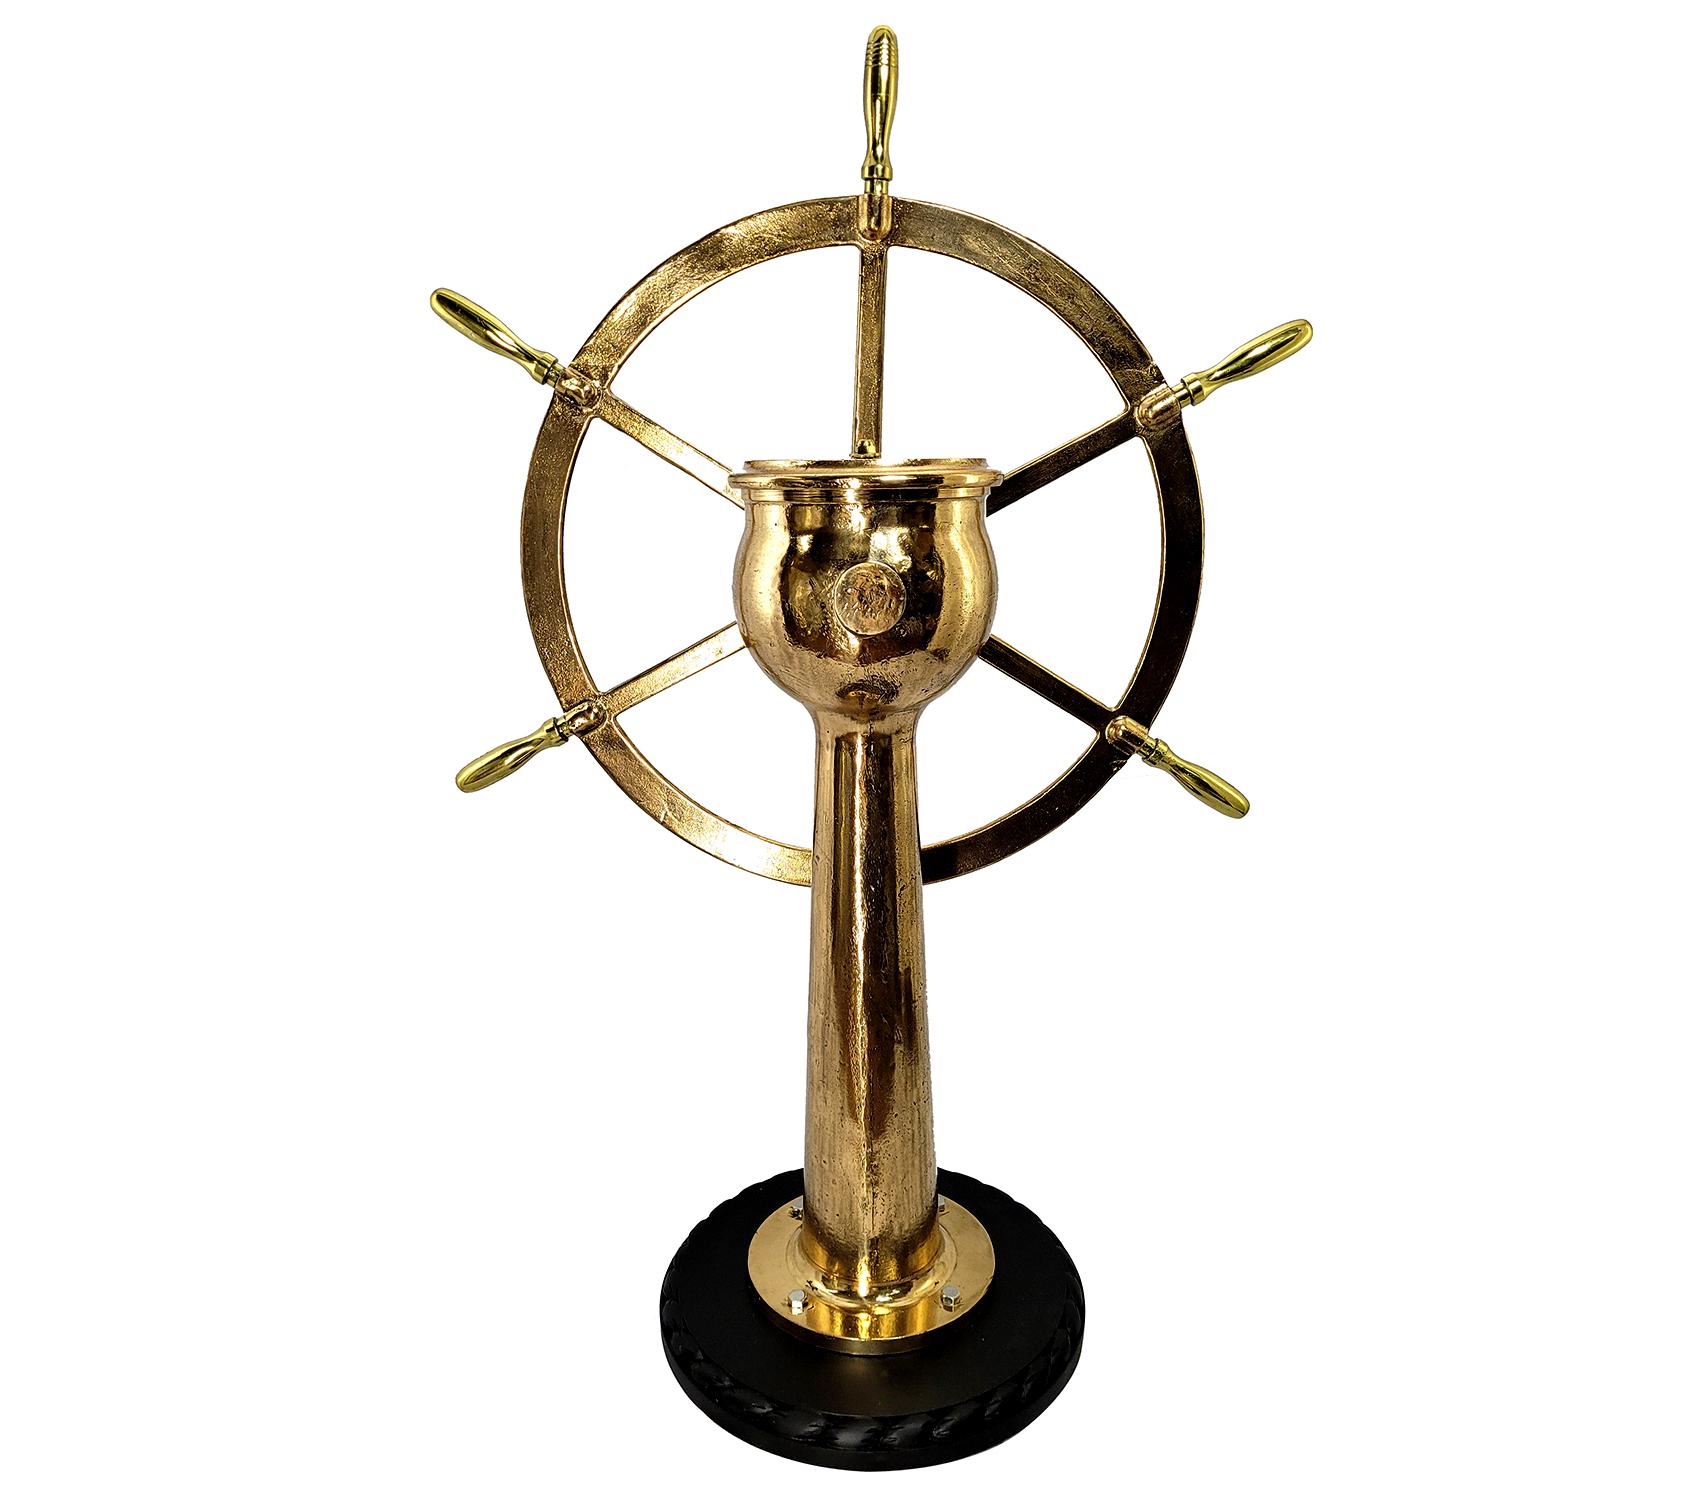 Very impressive six spoke ships wheel mounted to a geared pedestal. The pedestal head is engraved Dake Engine Company, Grand Haven Michigan, serial number 6595 with rudder indicator arrow. Entire unit has been meticulously polished and lacquered.